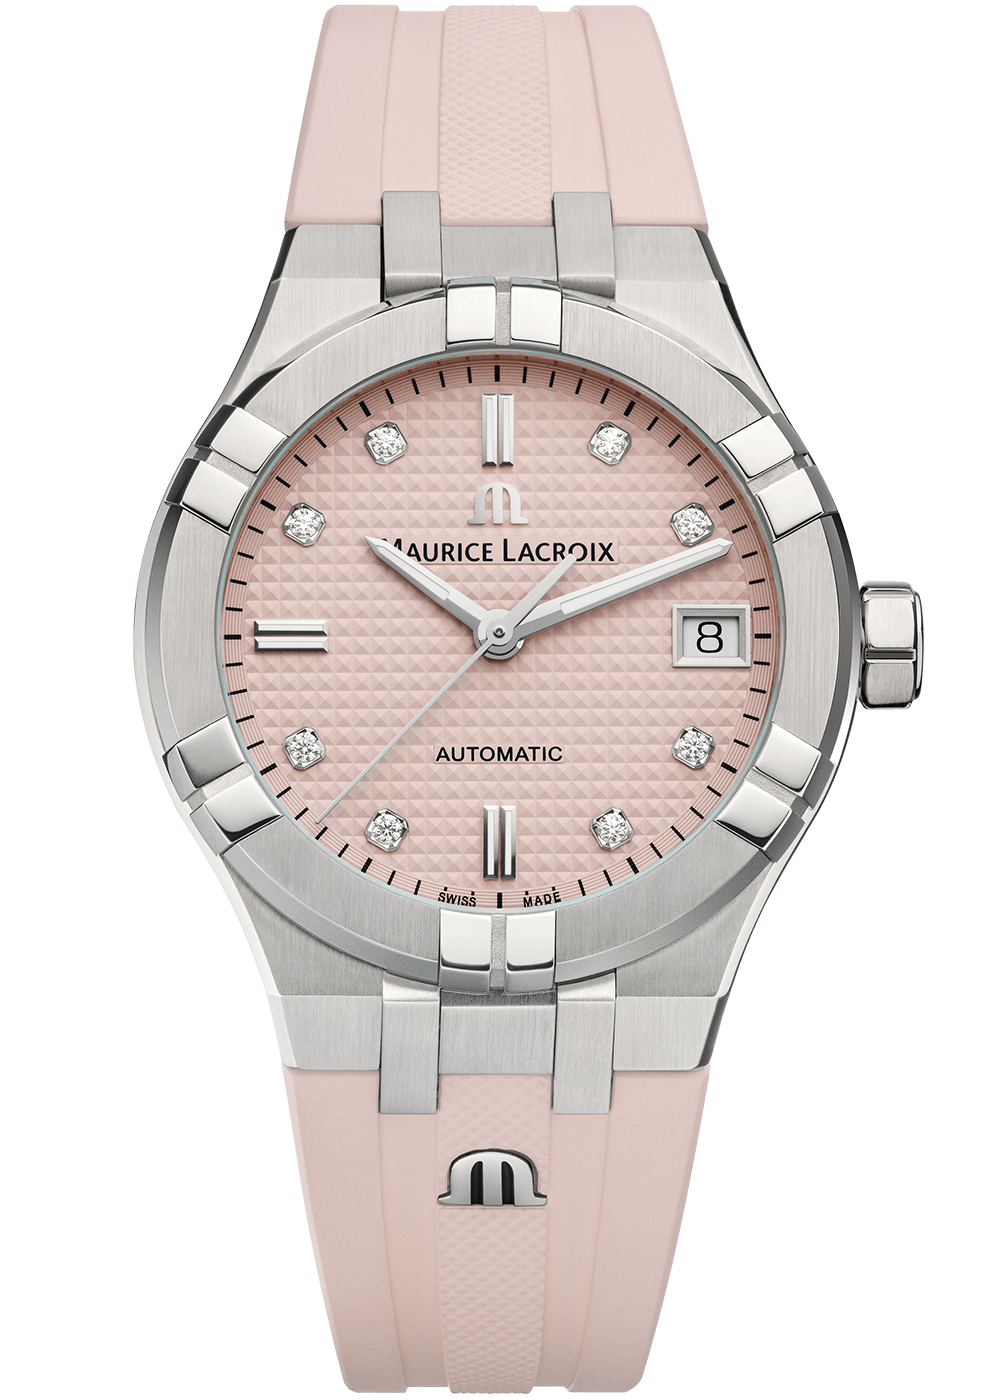 Maurice-Lacroix-AIKON Automatic Limited Summer Edition 35mm_zurich